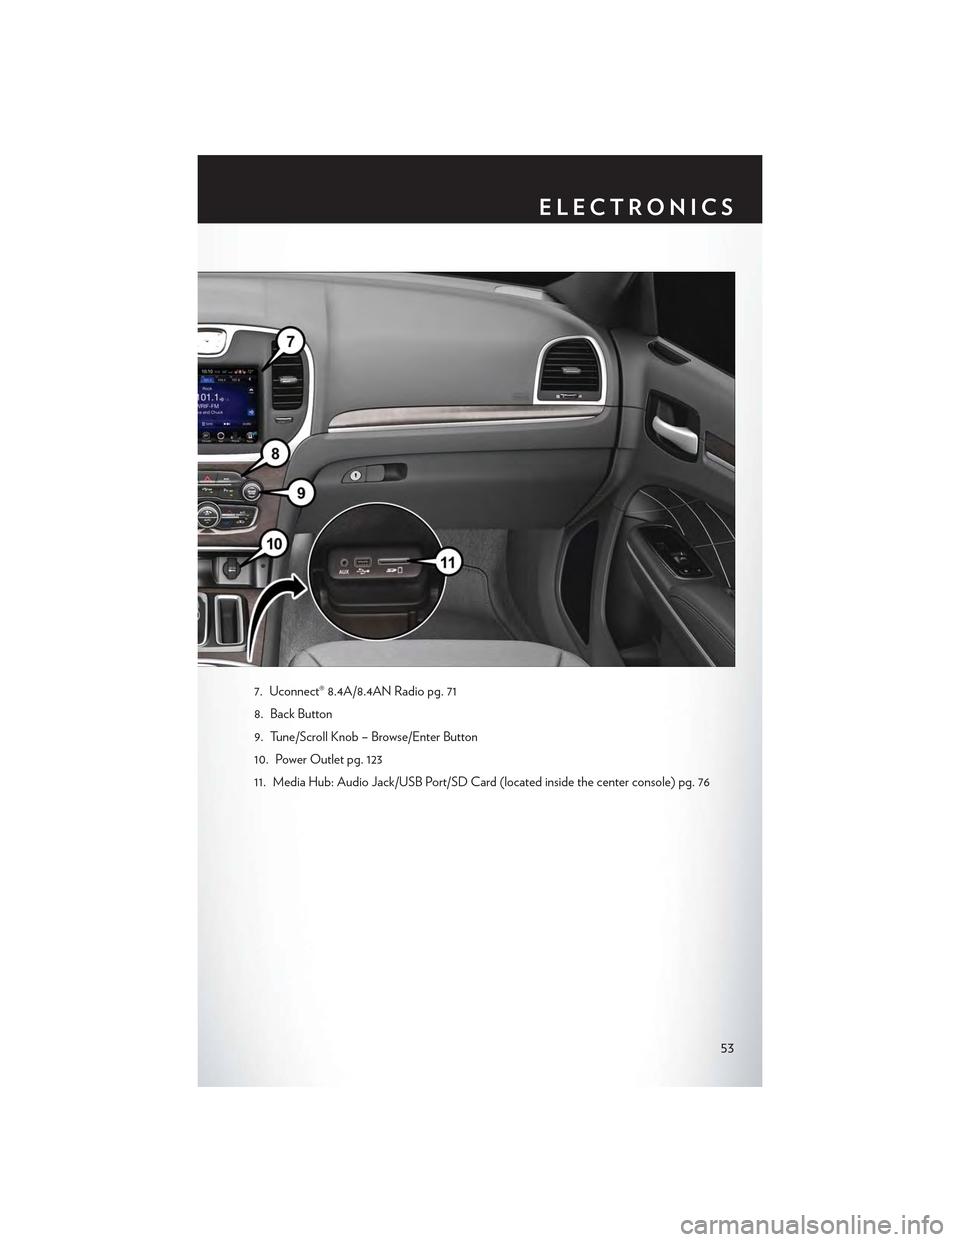 CHRYSLER 300 2015 2.G User Guide 7. Uconnect® 8.4A/8.4AN Radio pg. 71
8. Back Button
9. Tune/Scroll Knob – Browse/Enter Button
10. Power Outlet pg. 123
11. Media Hub: Audio Jack/USB Port/SD Card (located inside the center console)